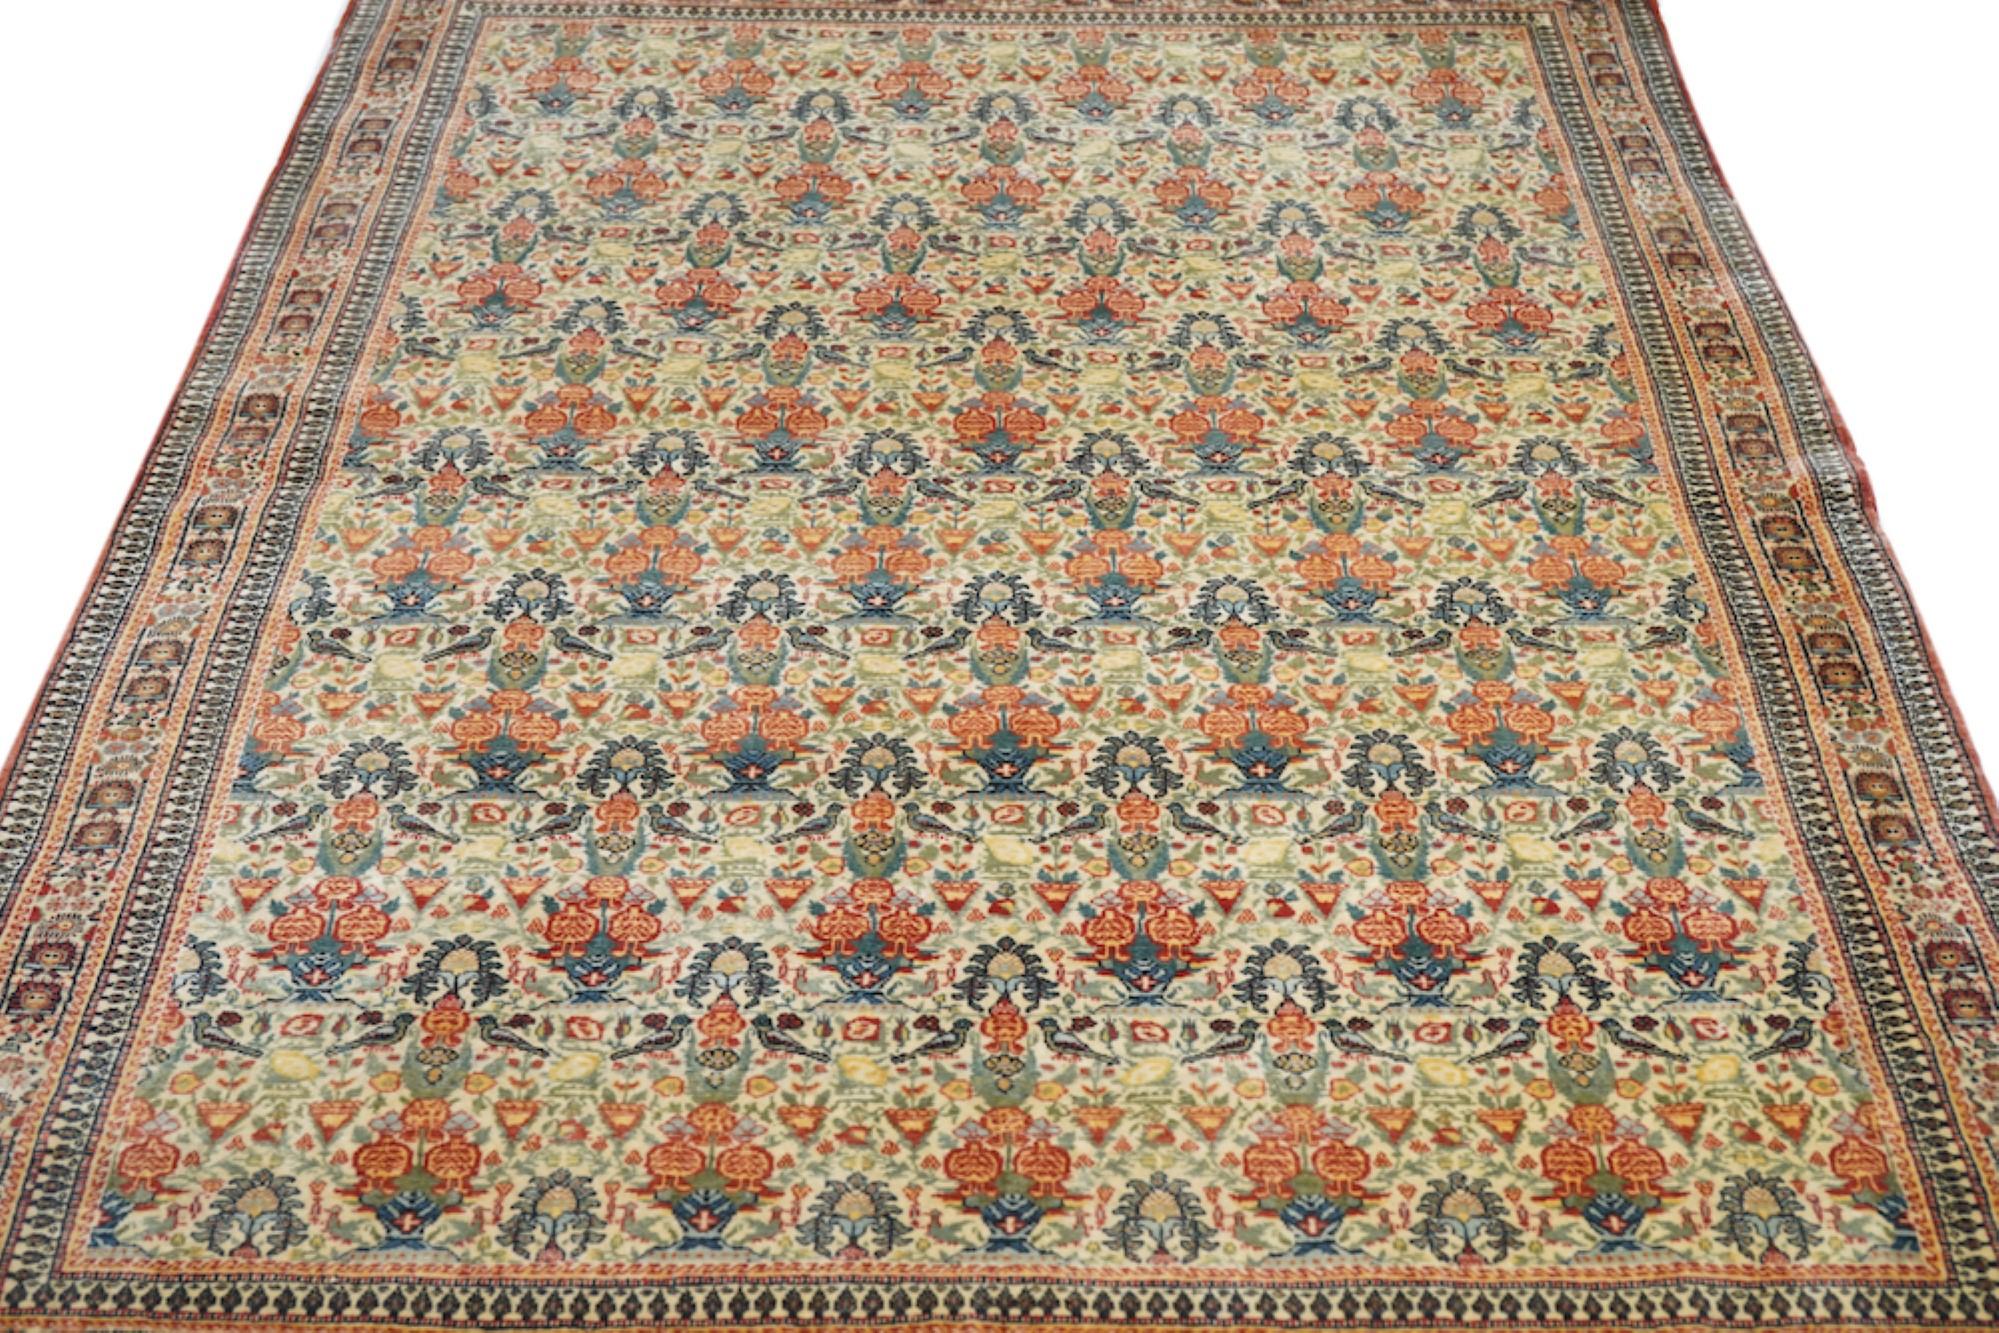 Extreamly Fine Antique Persian Tehran Rug 4'9'' x 6'8'' For Sale 3